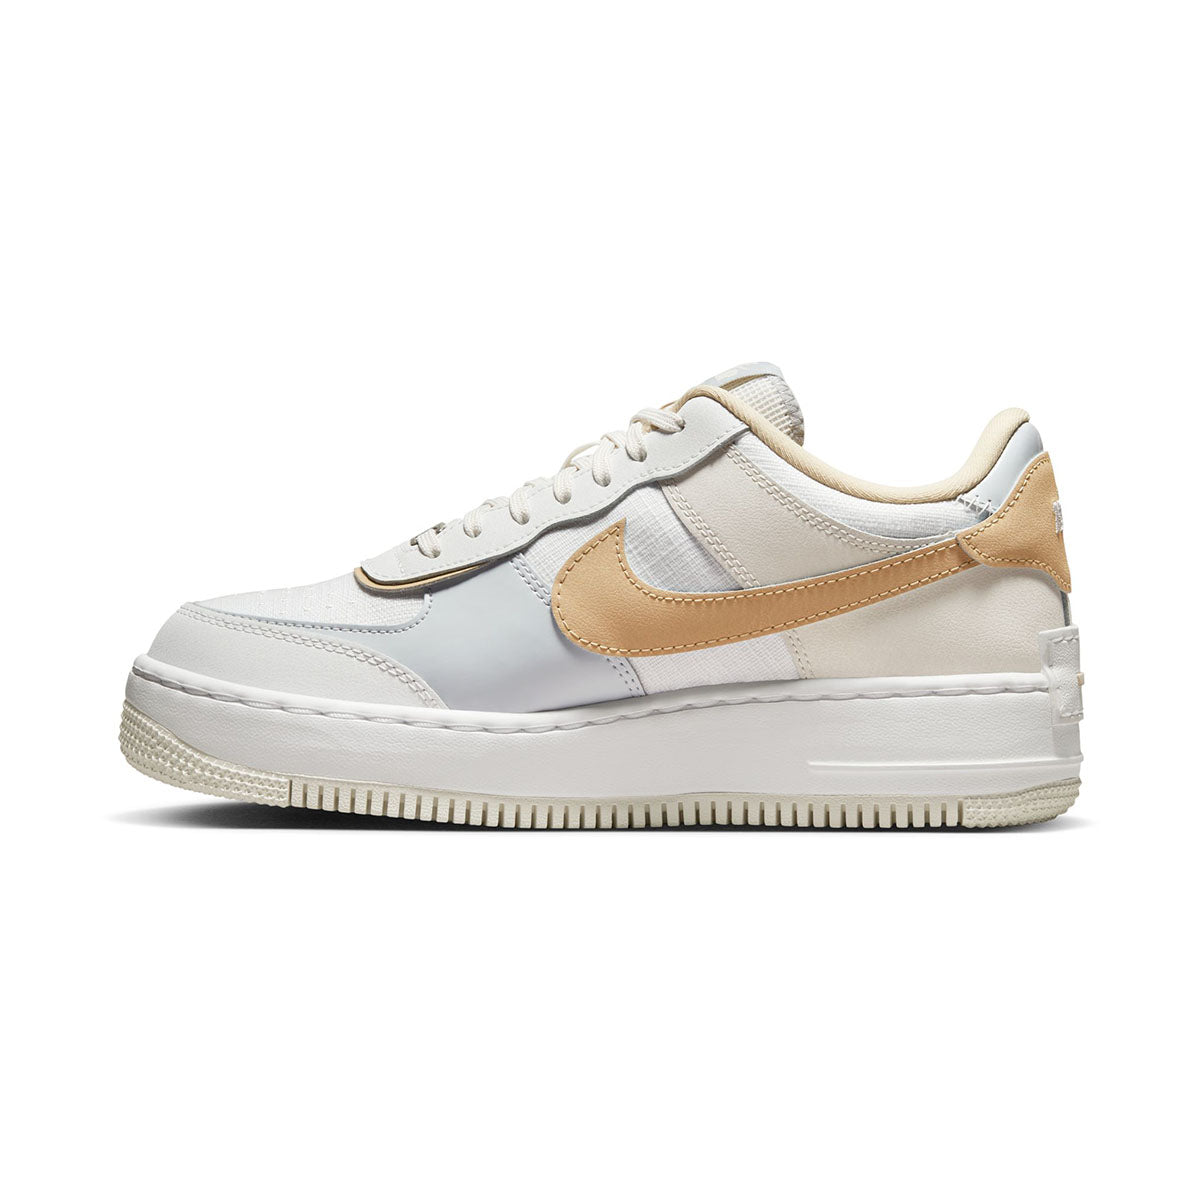 Nike Women's Air Force 1 Shadow Casual Basketball Shoes